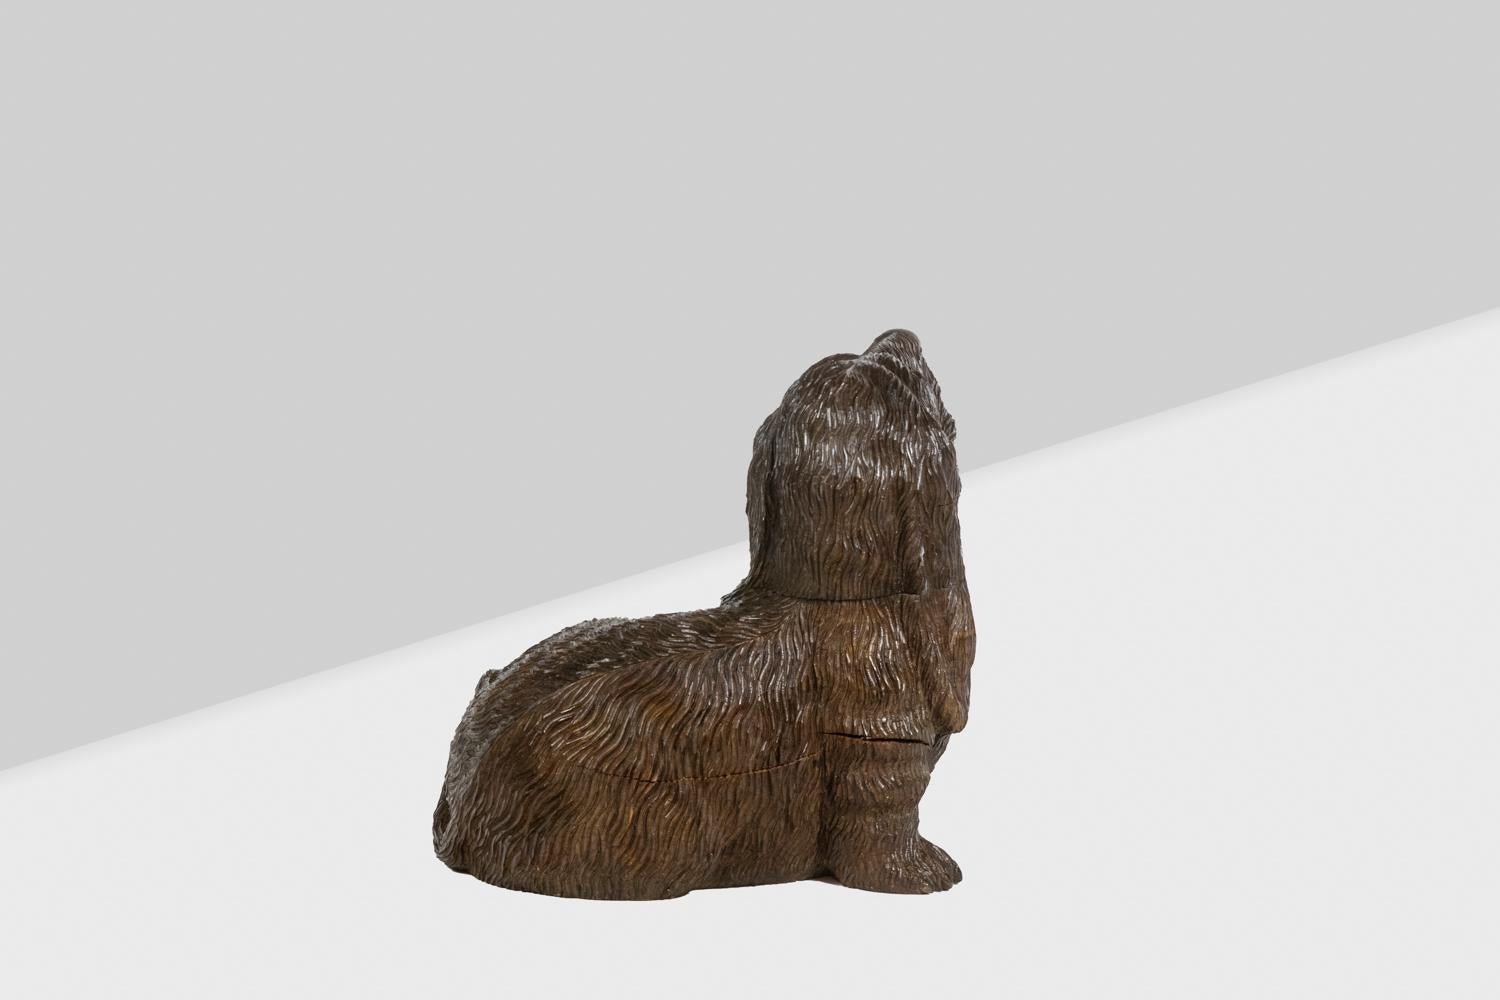 Carved basswood dog, Black Forest style, sitting and looking to the left.

European work realized circa 1900.

Reference: LS58851209D